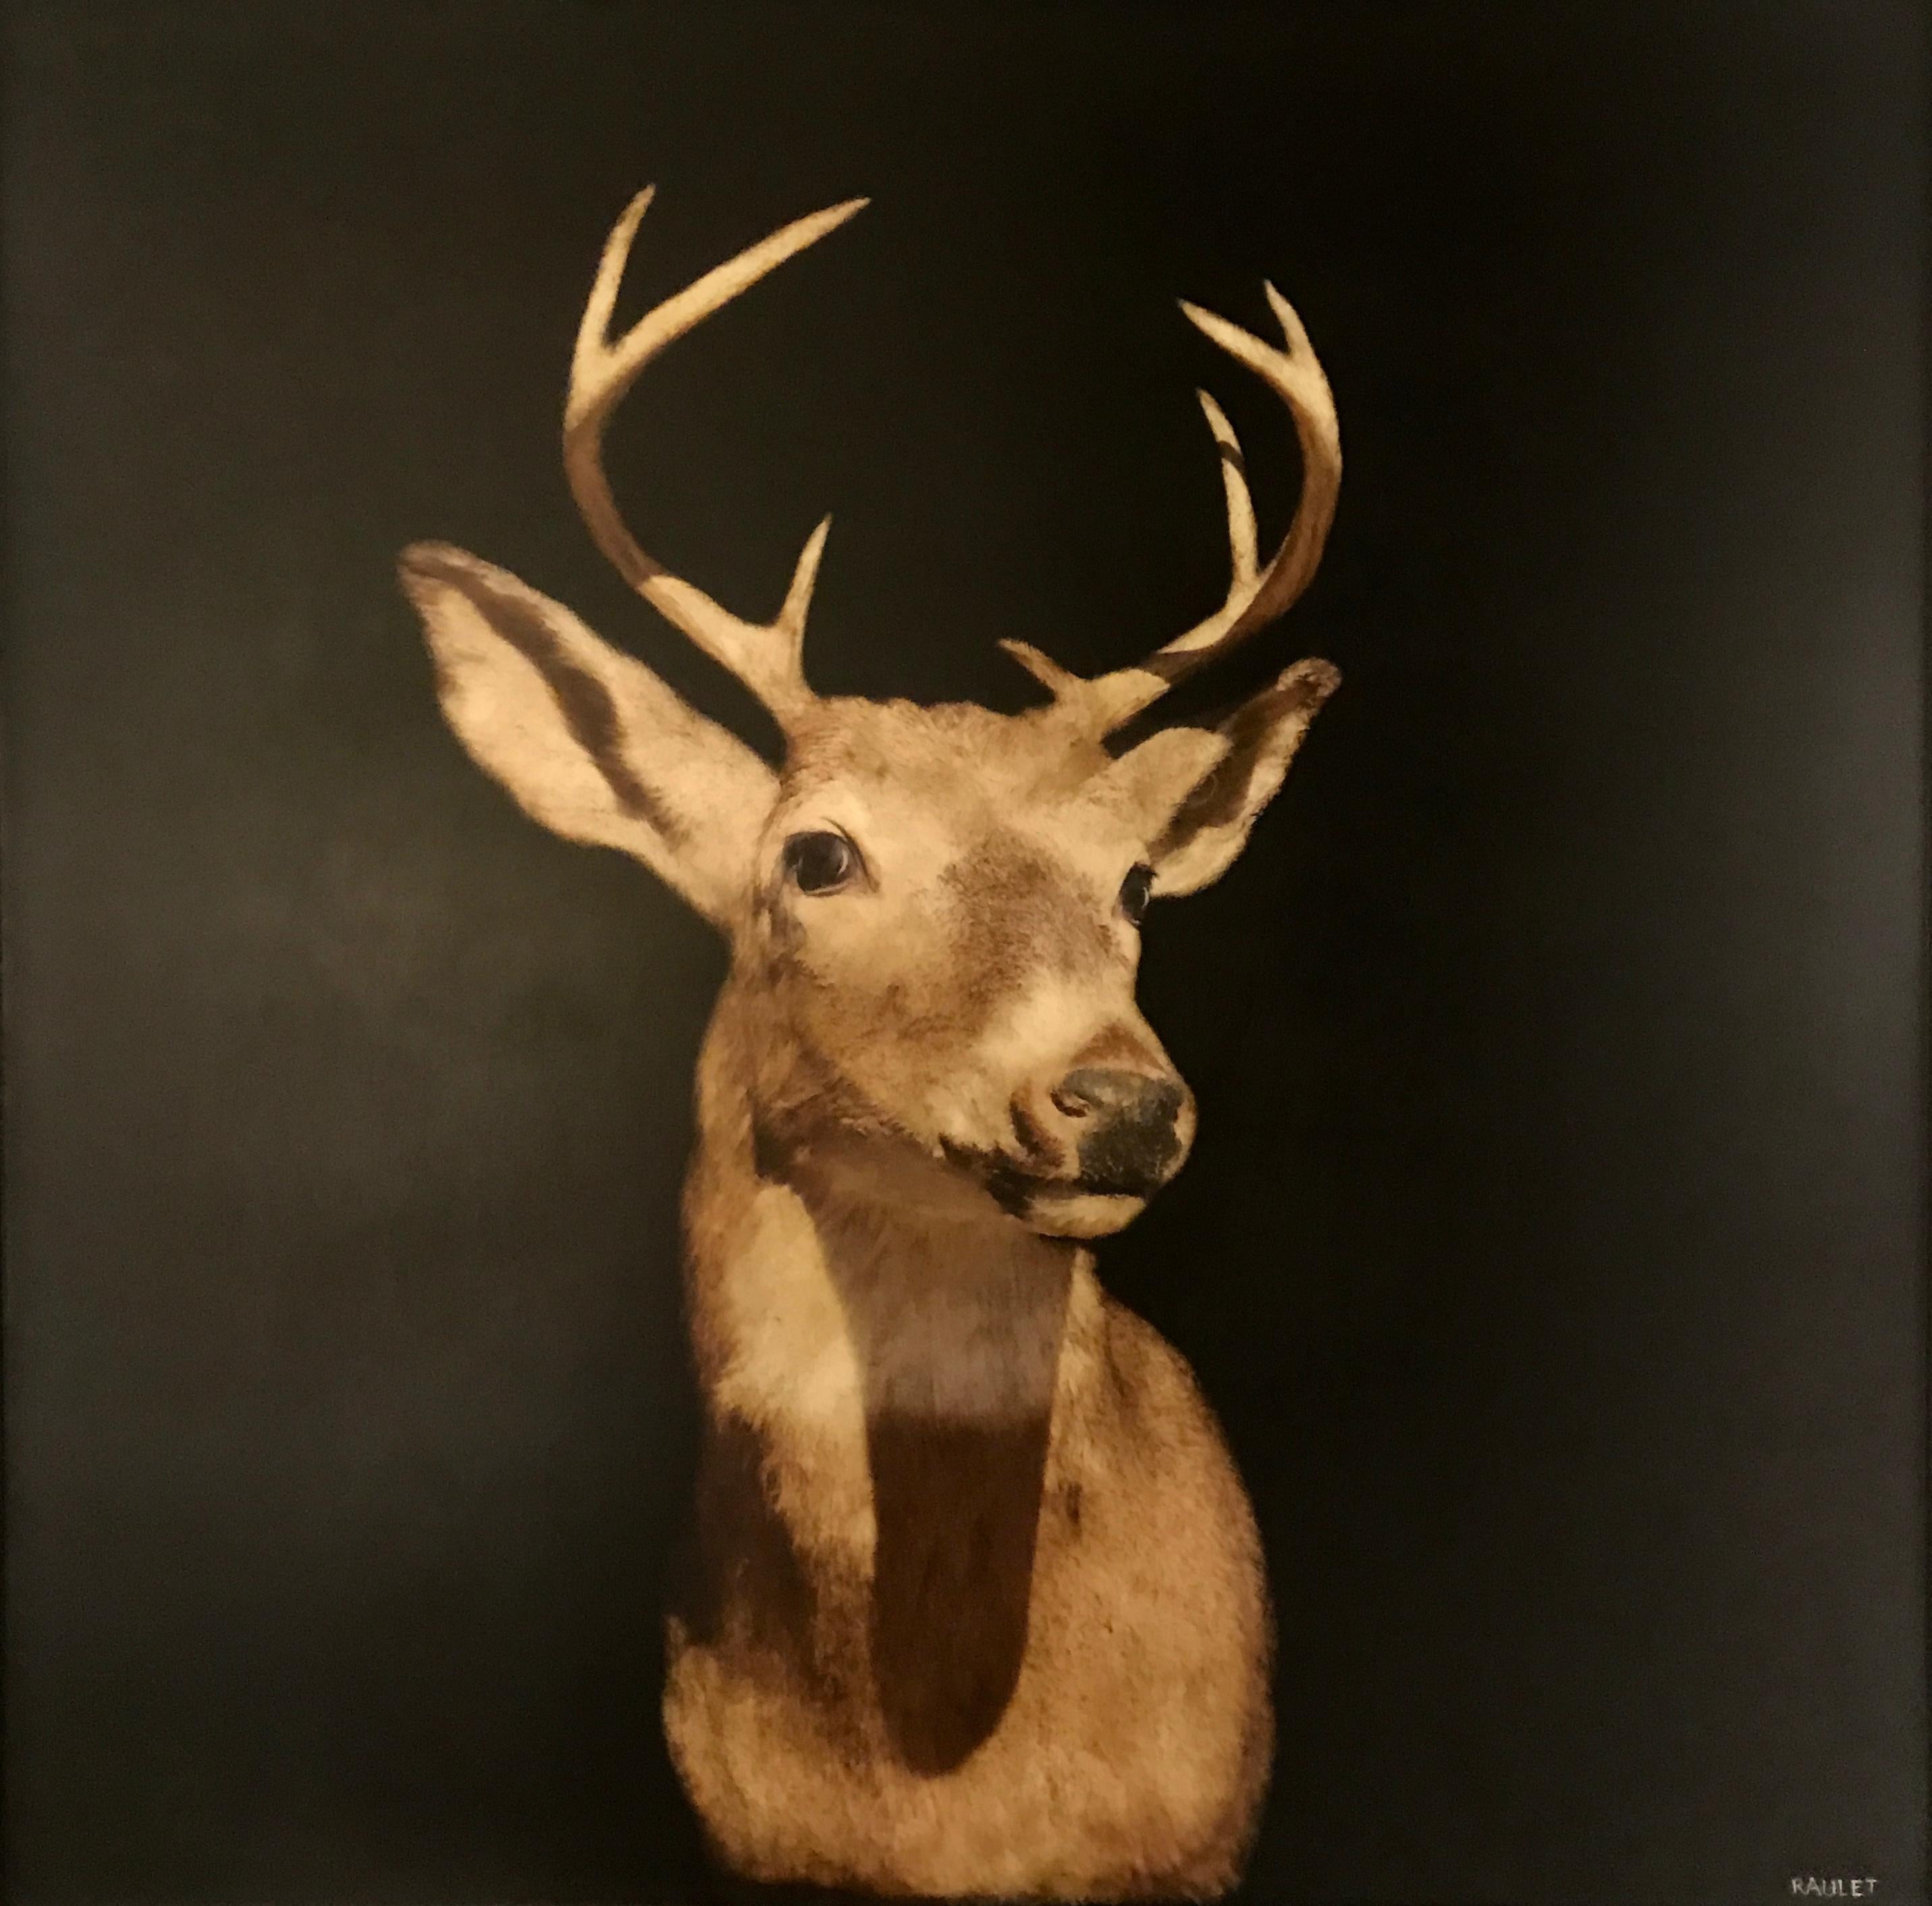 'Buck Head' is a large framed contemporary mixed media on panel painting created by American artist Dawne Raulet in 2019. Painted on a dark background allowing our eye to embrace the scene beautifully, a majestic buck is looking at us directly, his